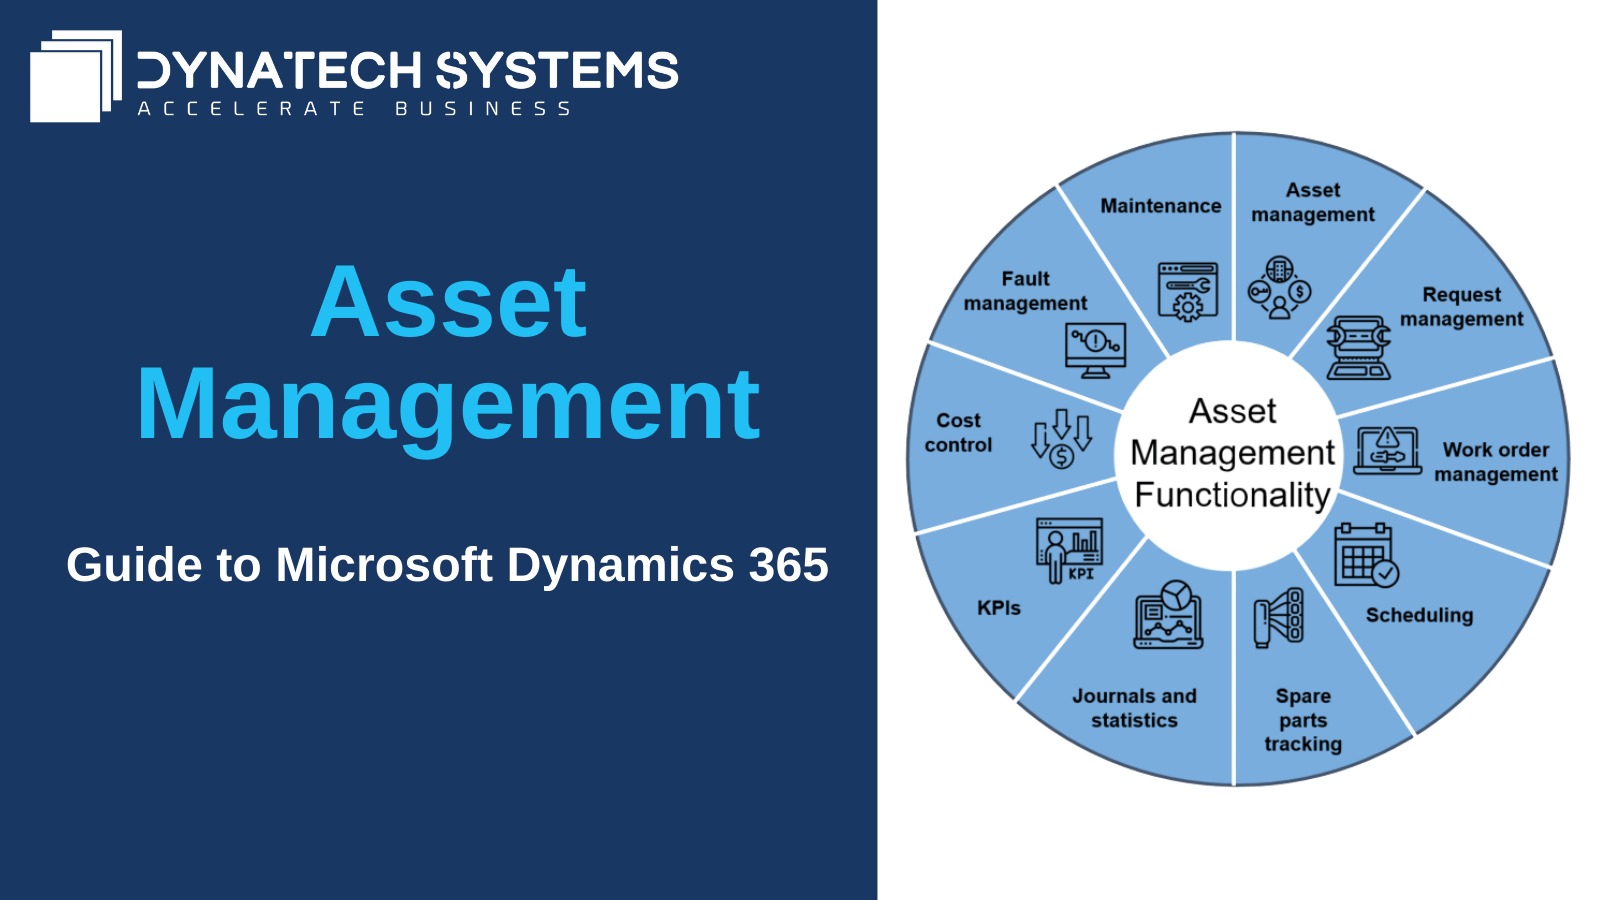 Guide to Dynamics 365 Asset Management